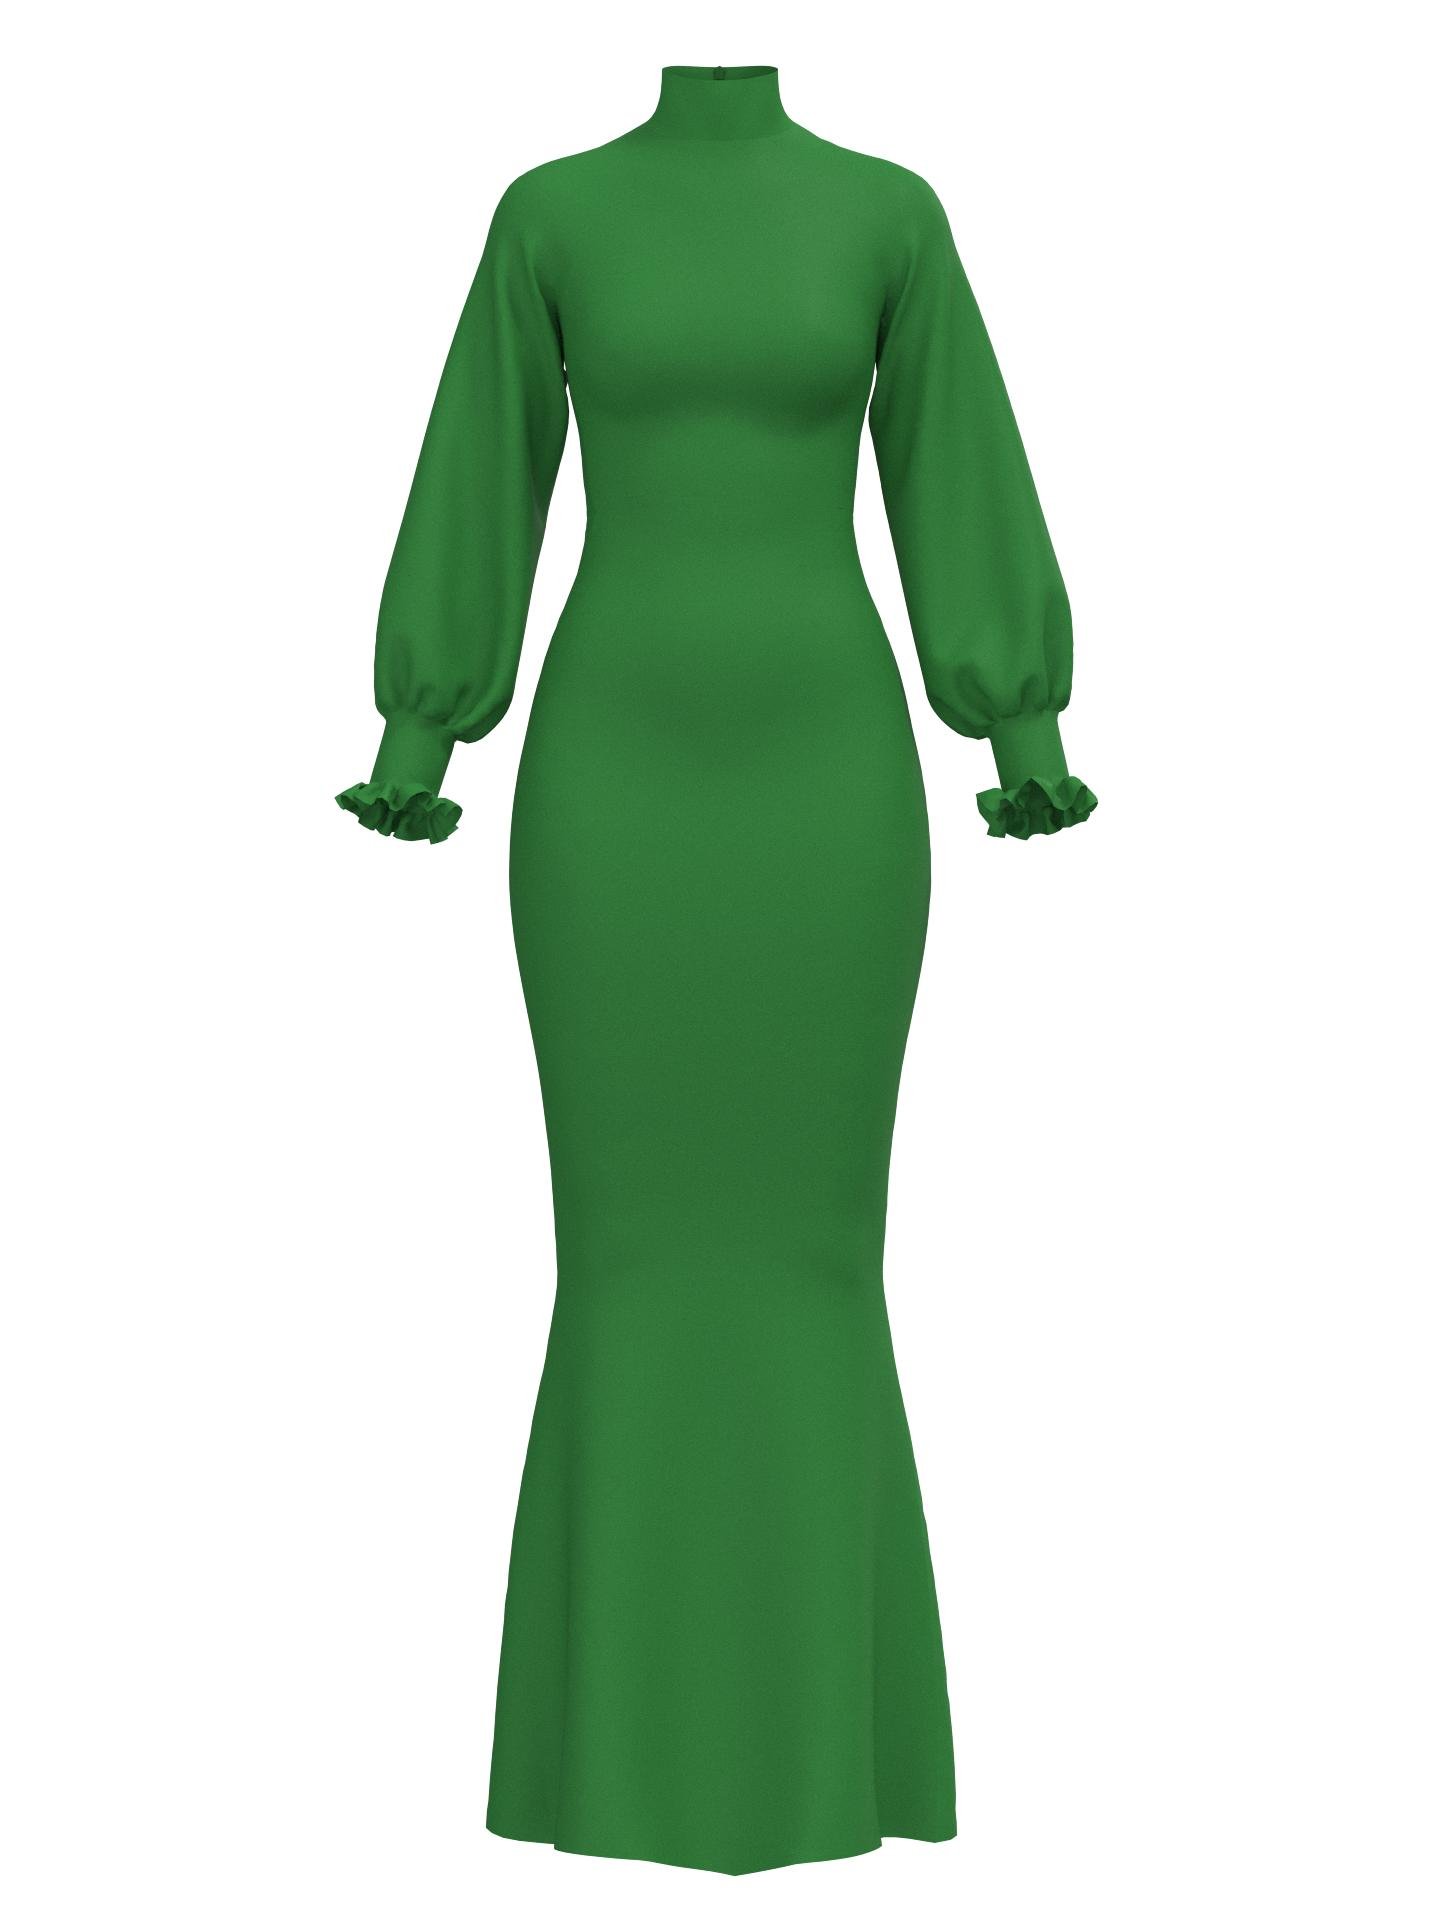 Green Emerald Elegance Gown by NEOMODEST